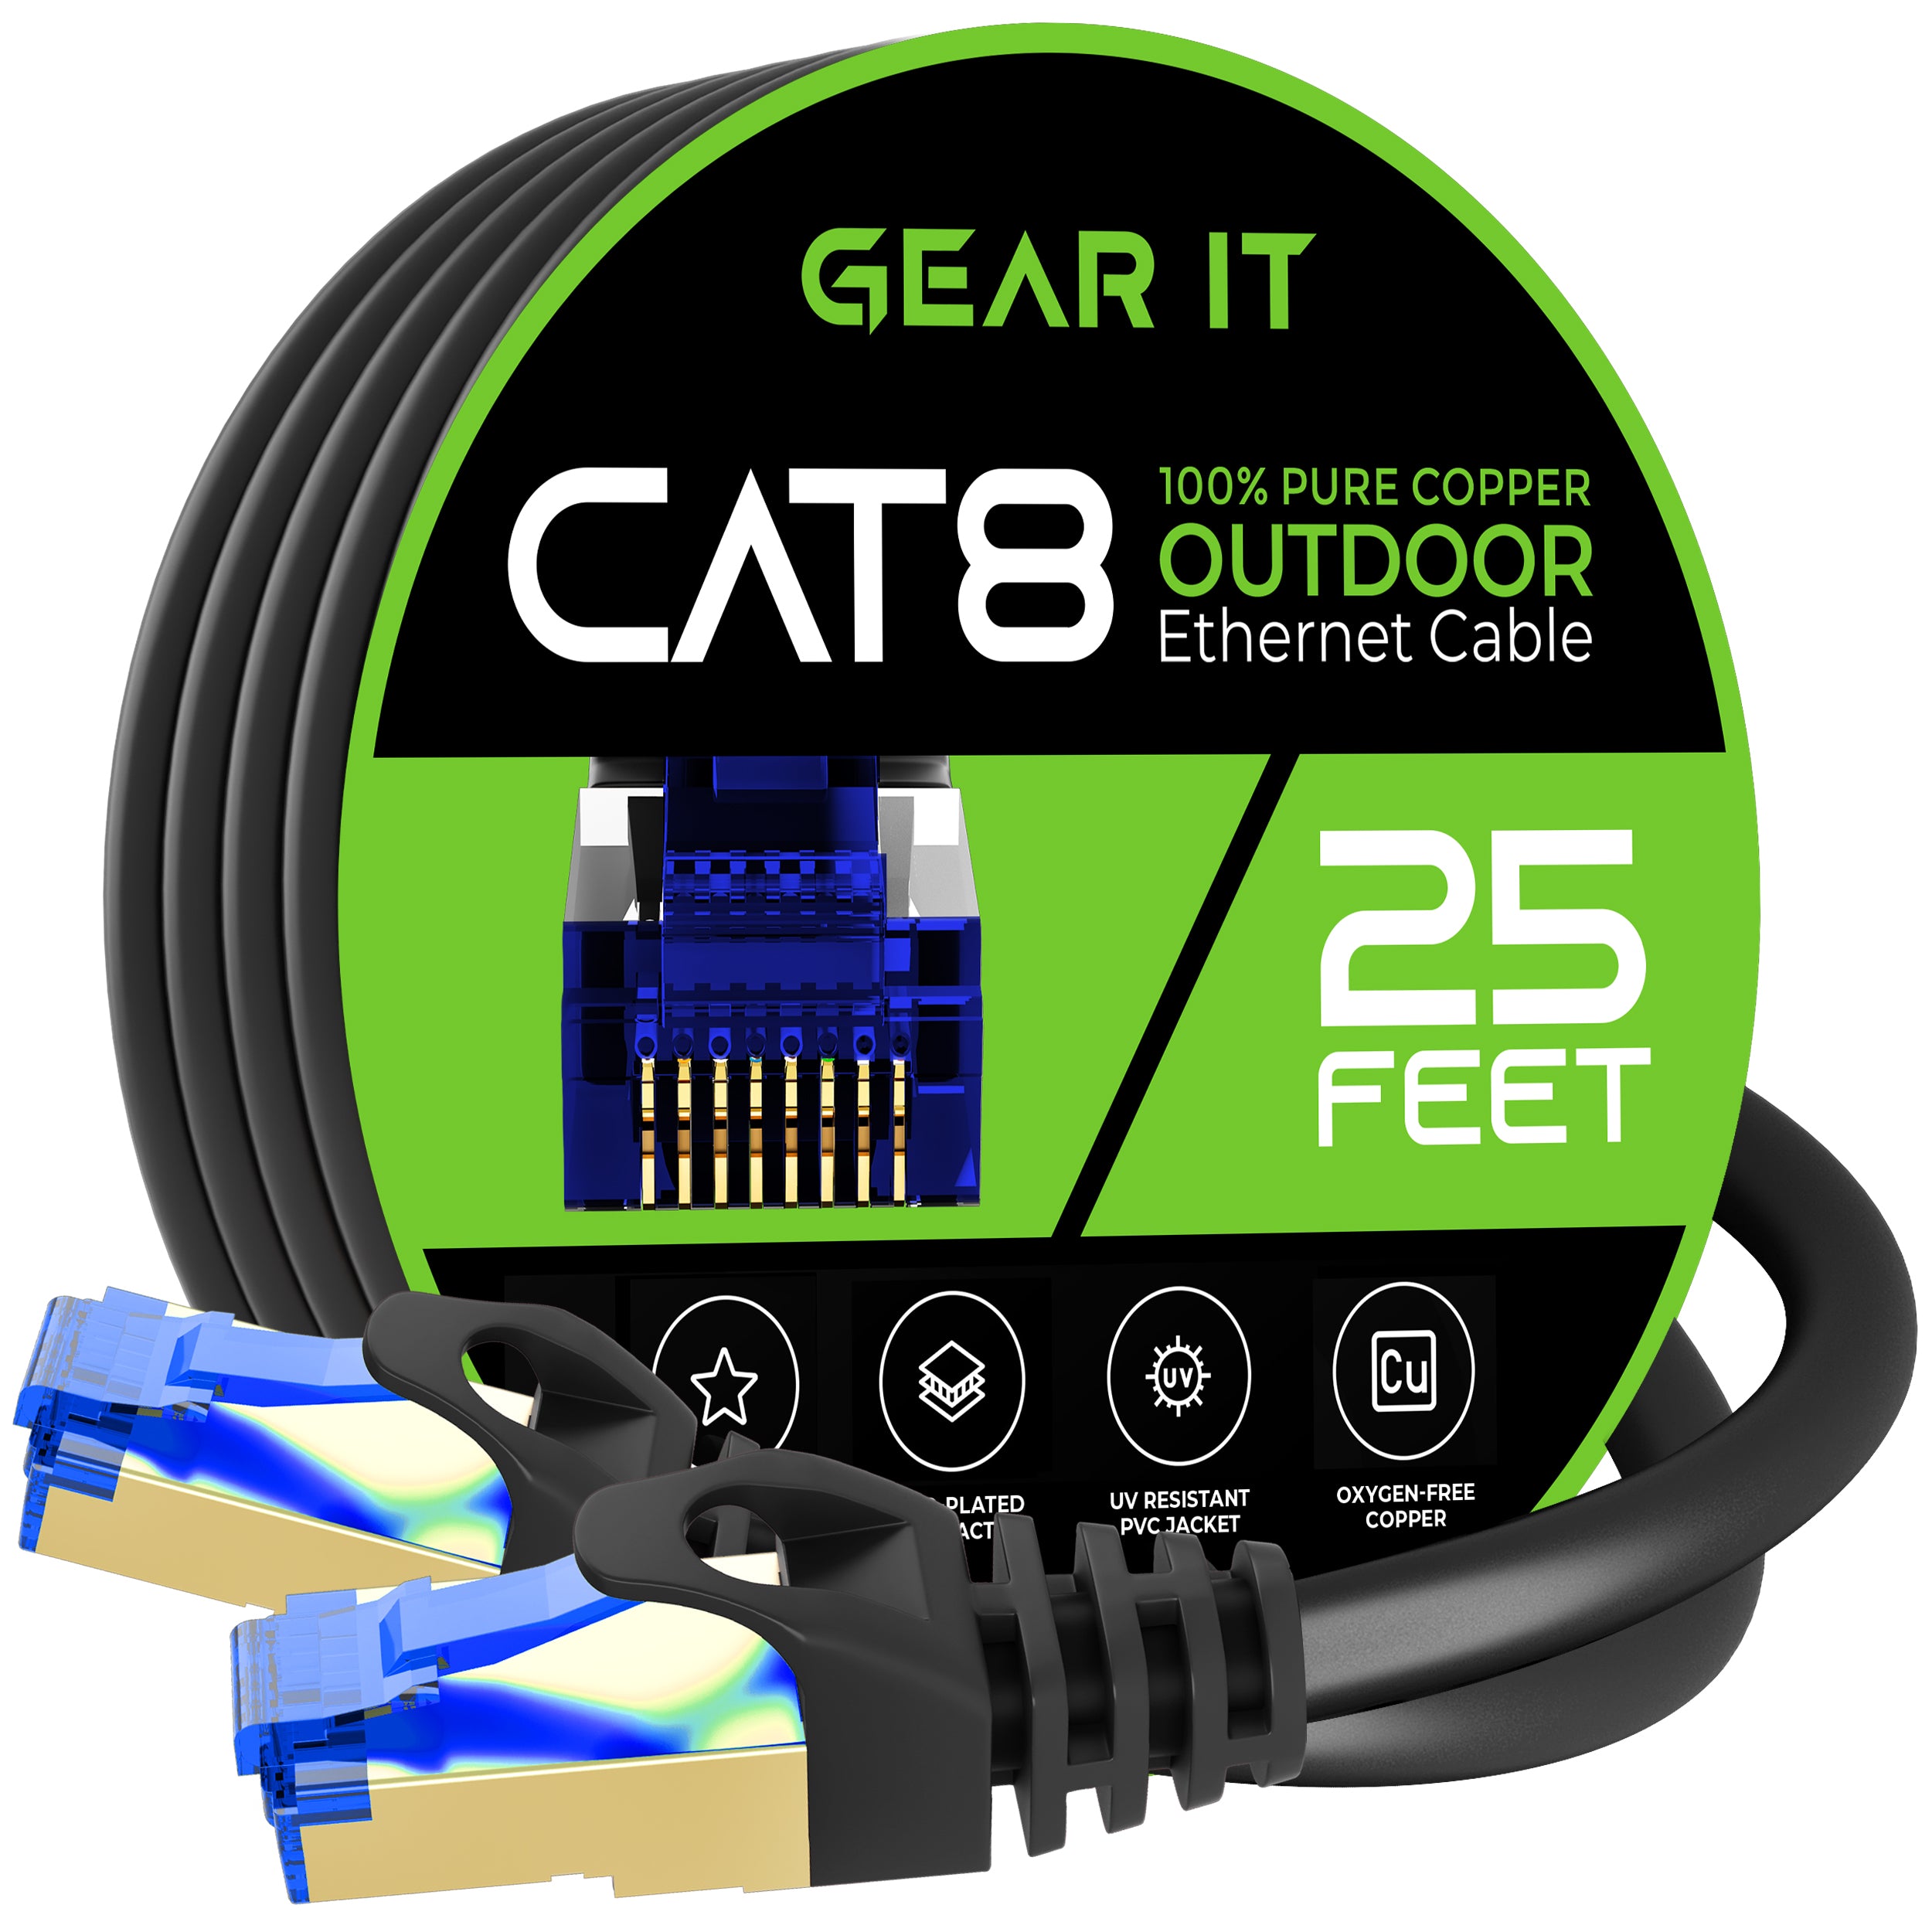 Can ps5 use cat8 ethernet?